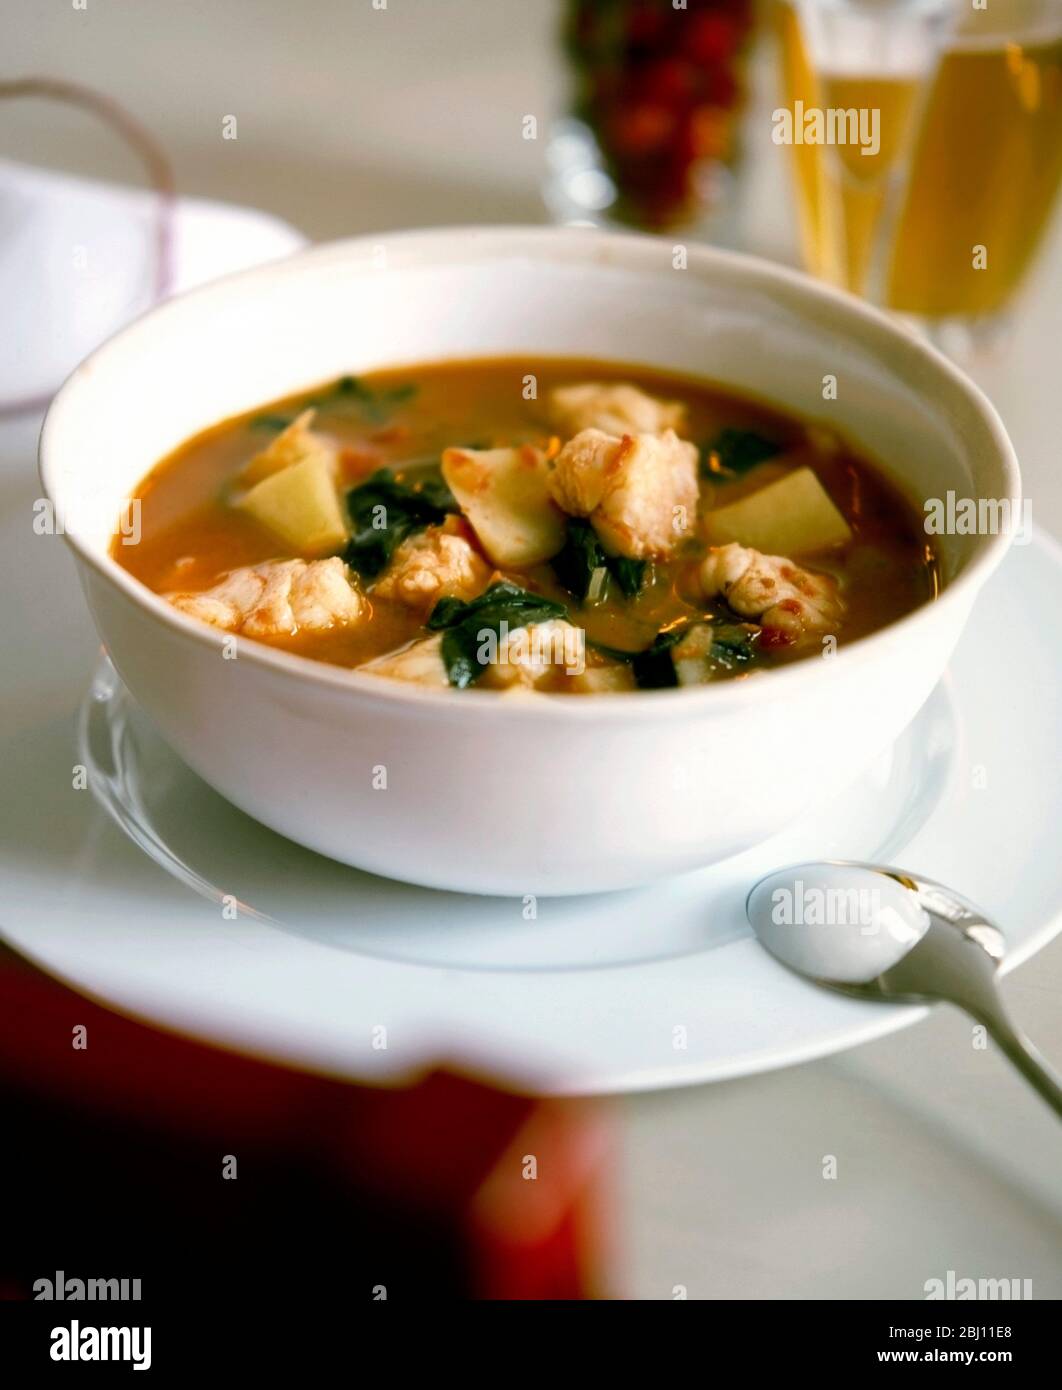 Spicy fish soup or stew with monkfish and vegetables - Stock Photo